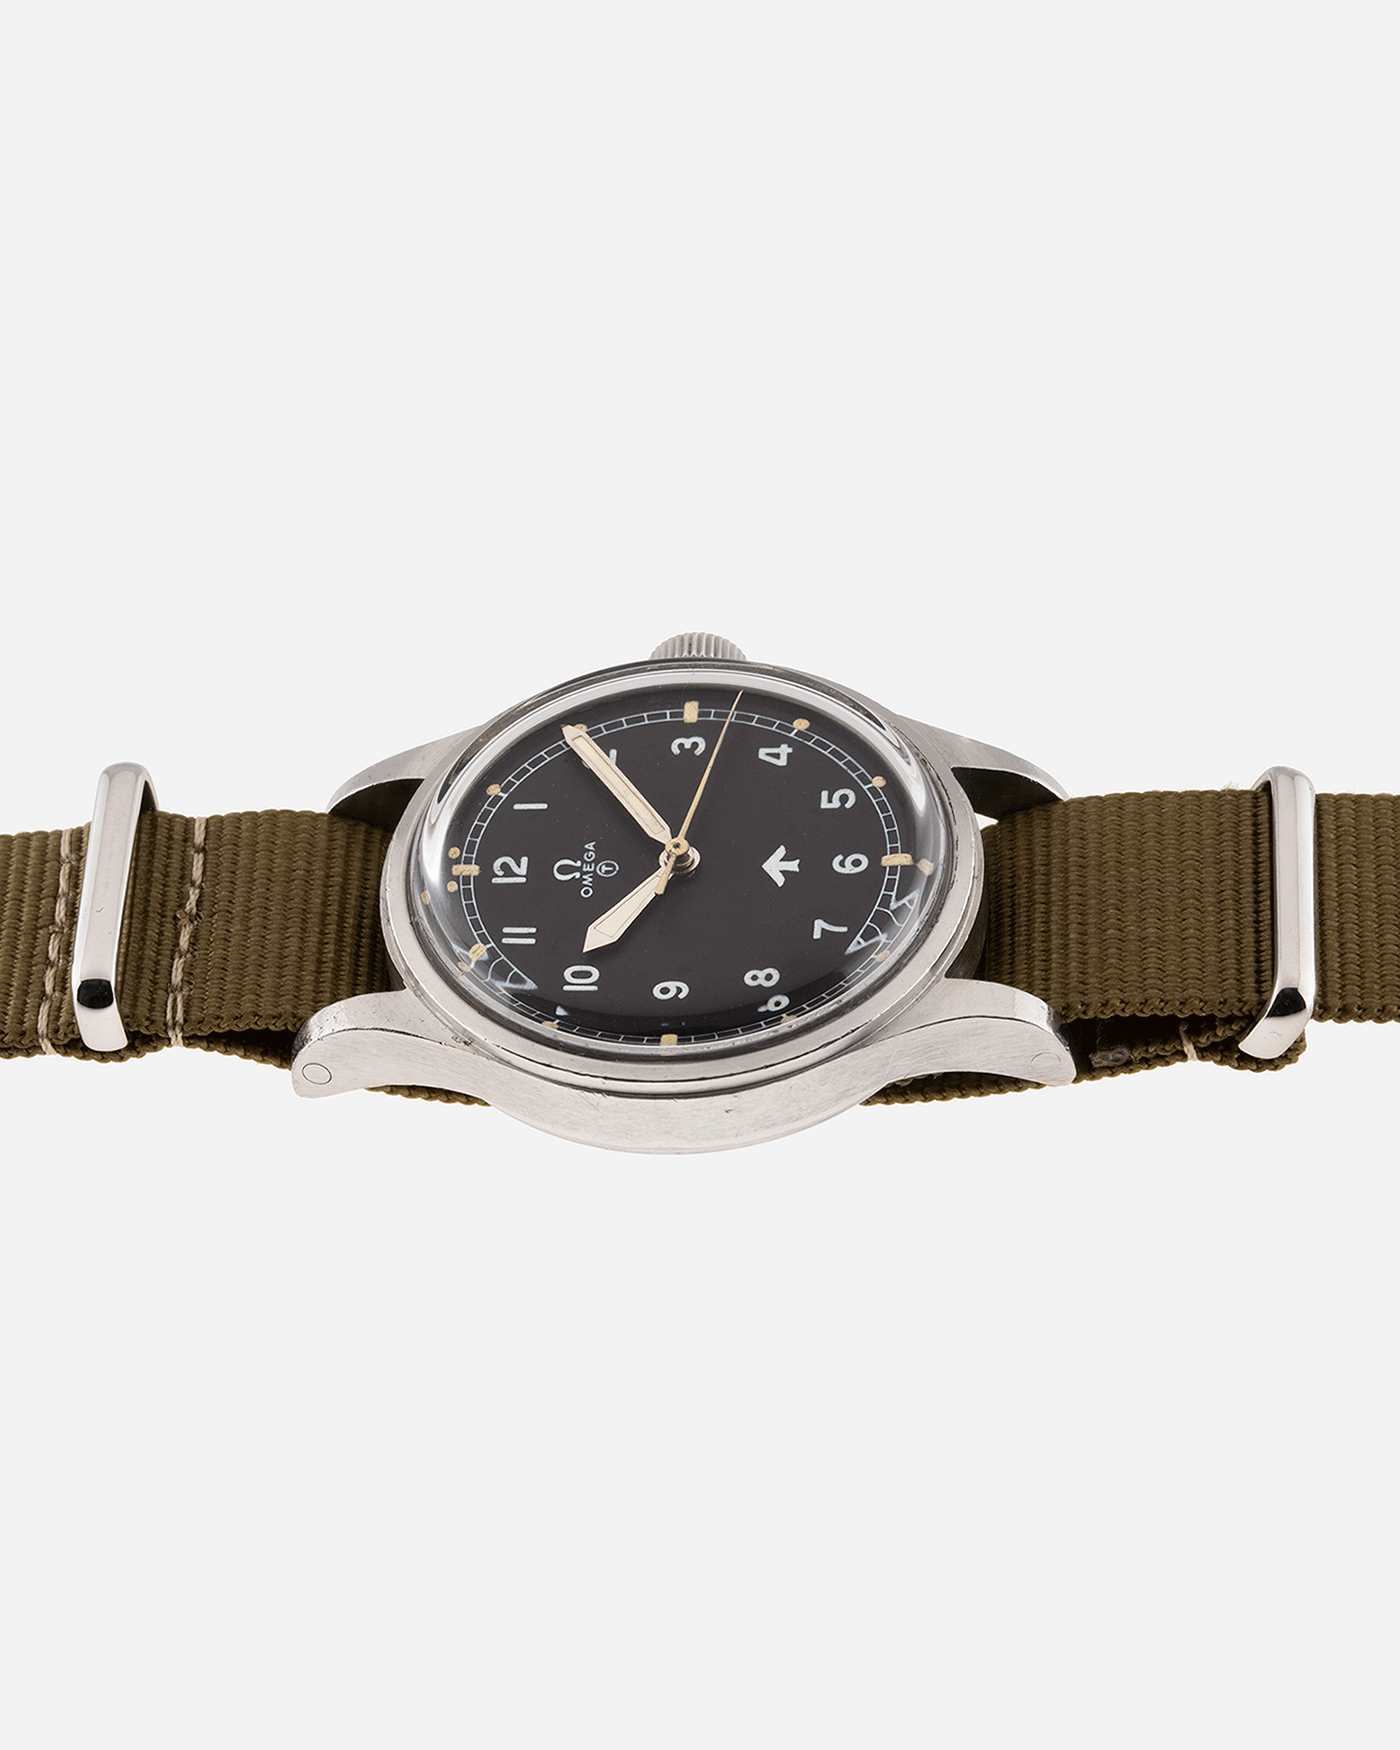 Brand: Omega Year: 1953 Model: Fat Arrow 53 Reference Number: CK 2777-1 Material: Stainless Steel Movement: ‘Specially Adjusted’ Cal. 283 Case Diameter: 37mm Lug Width: 18mm Bracelet/Strap: Green Fabric NATO